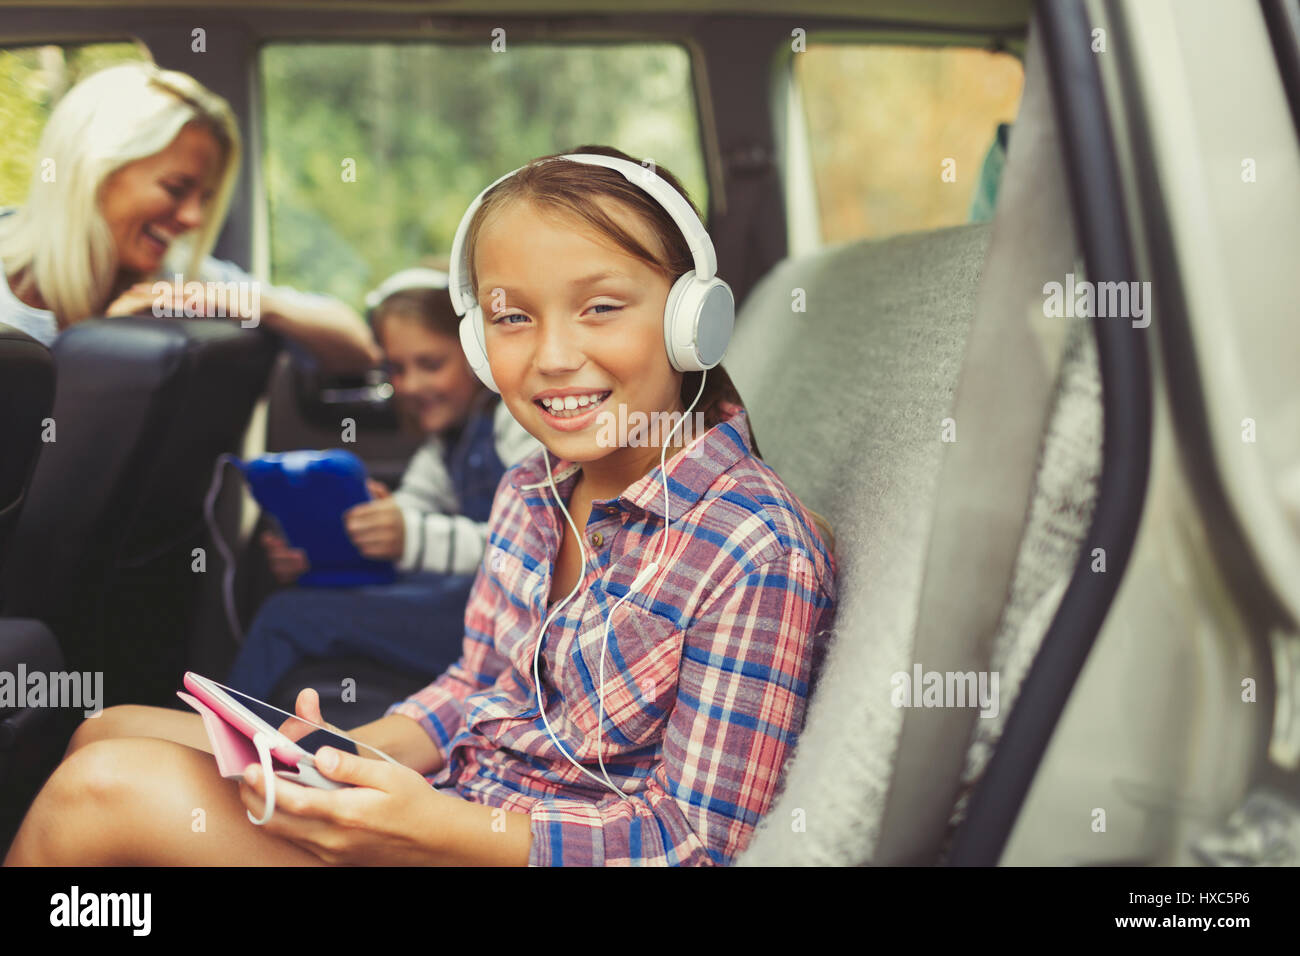 Portrait smiling girl with headphones using digital tablet in back seat of car Stock Photo